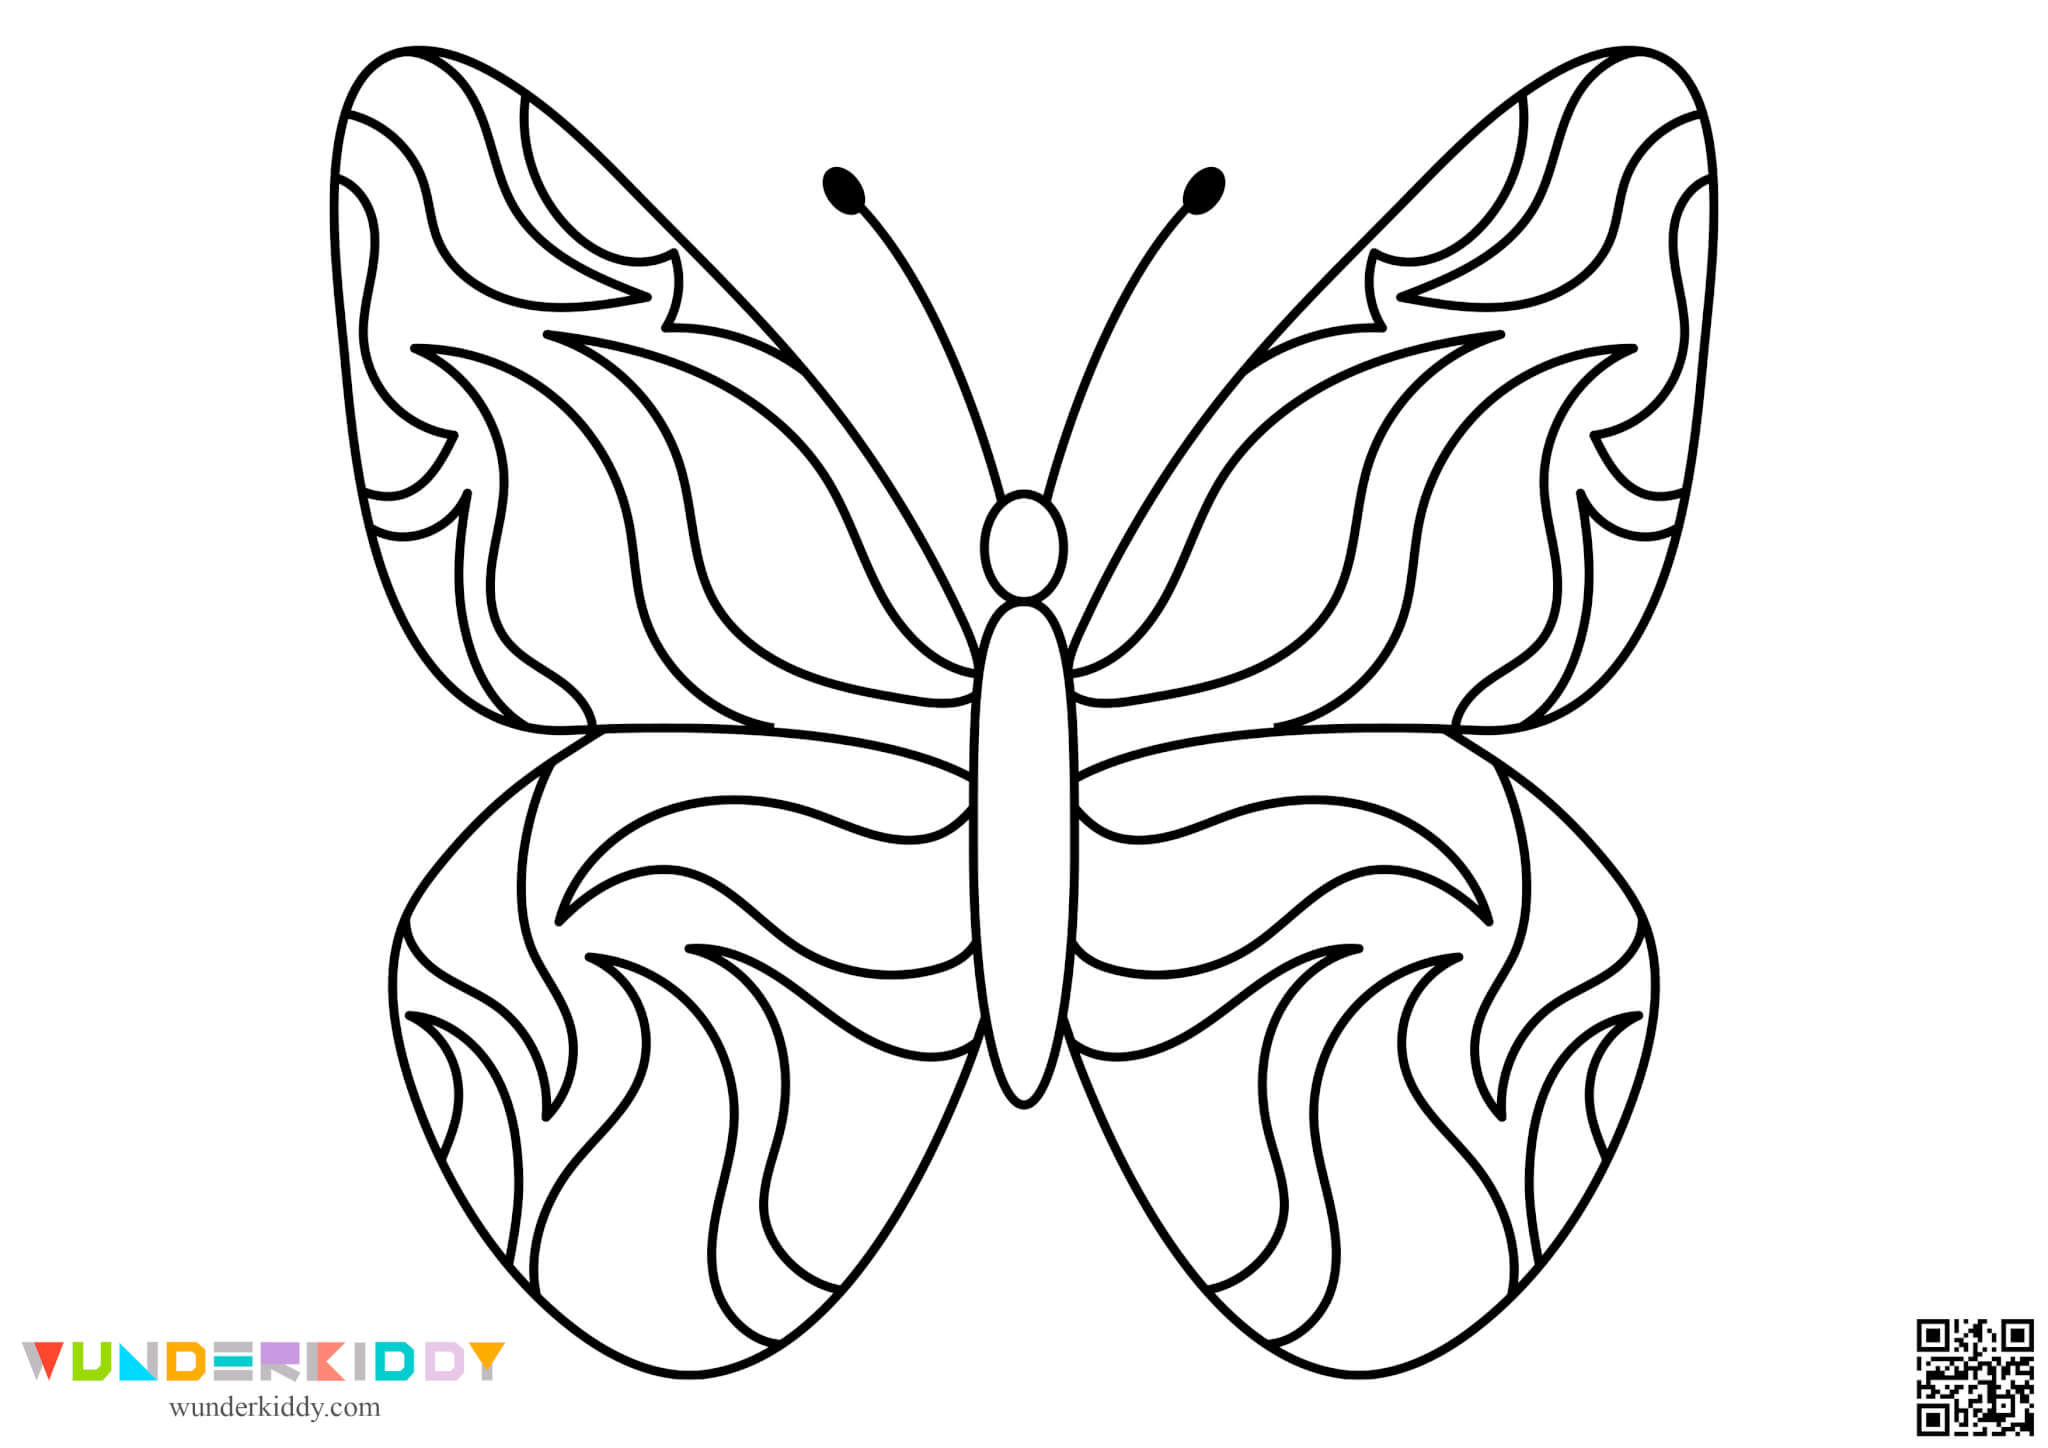 Butterfly Template Printable - Image 6